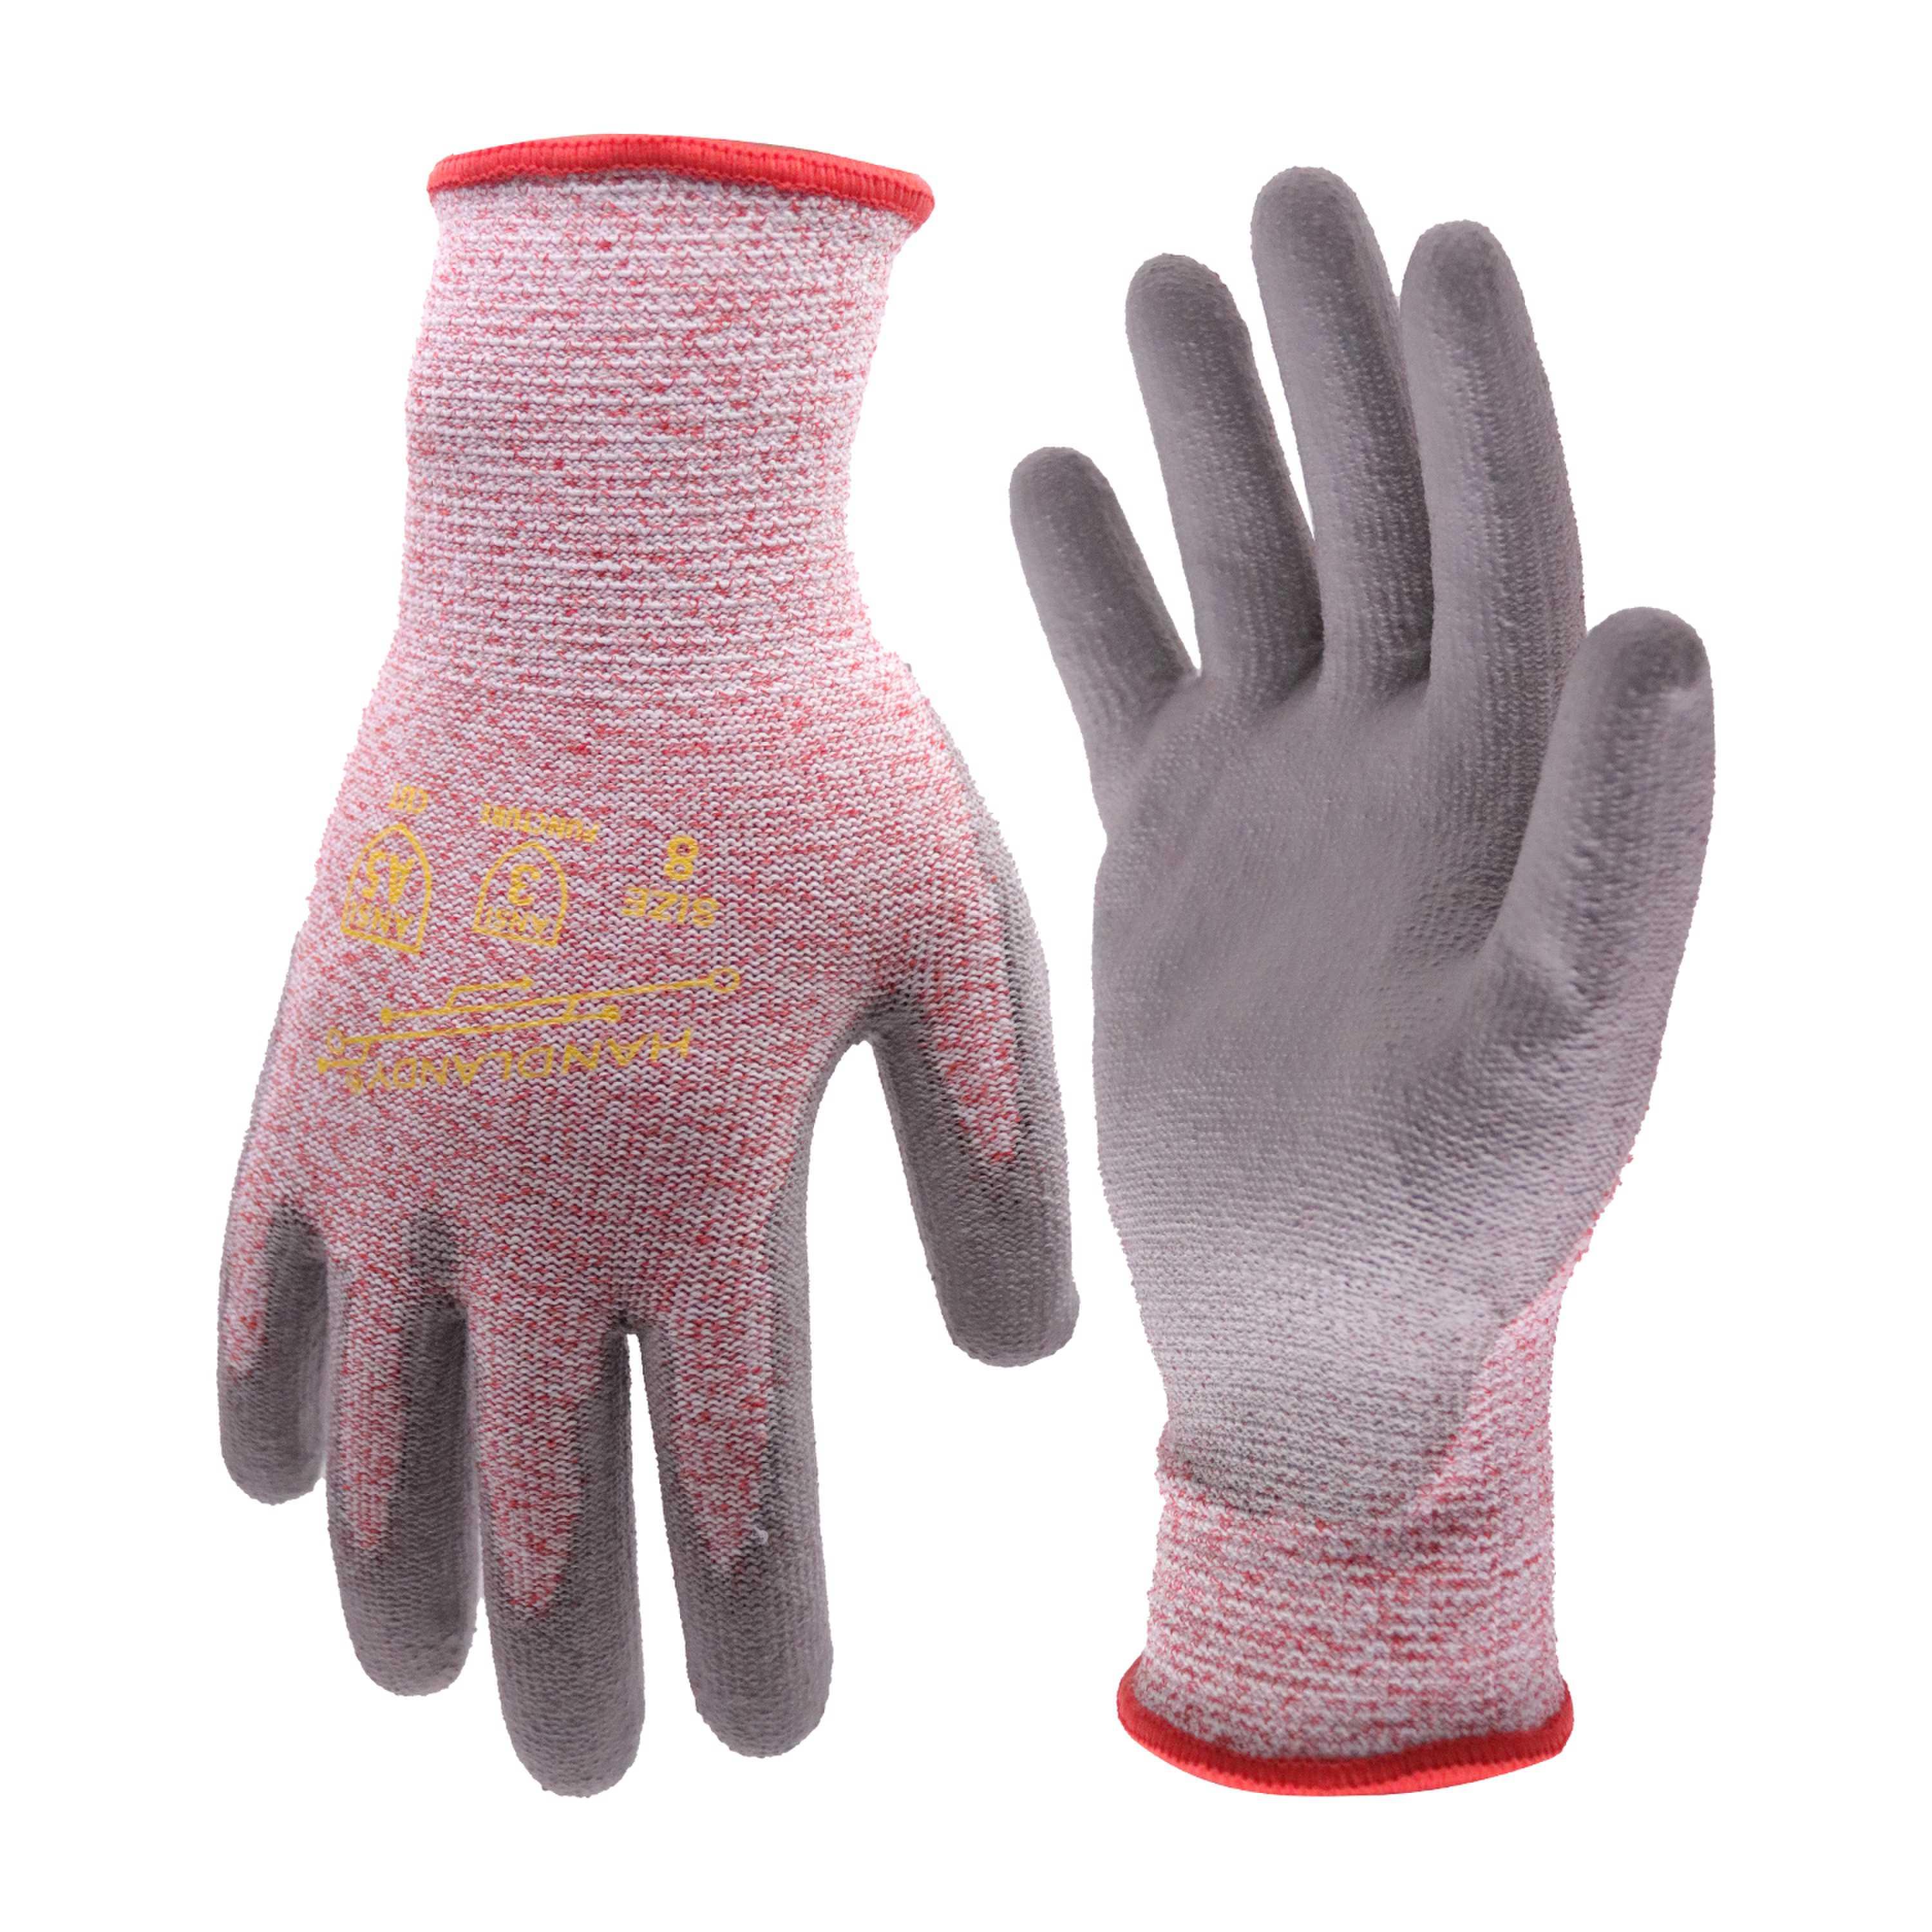 1083GN PRISAFETY technical dipping gloves latex winter safety work dipping PU palm ANSI gloves cut level 5